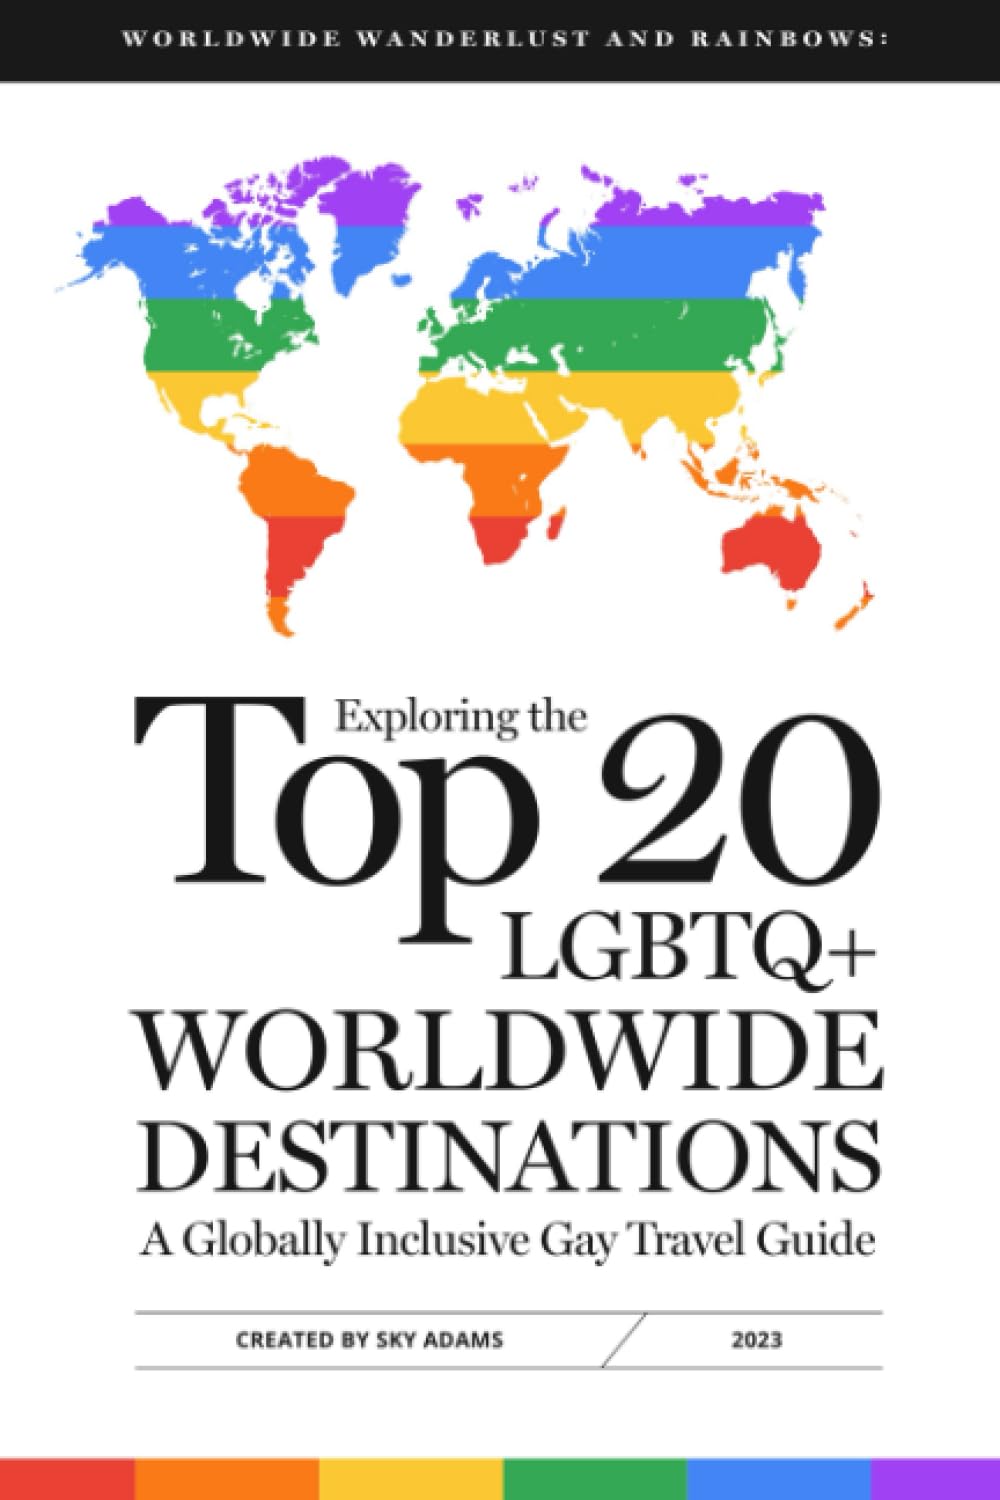 Worldwide Wanderlust and Rainbows: Exploring the Top 20 LGBTQ+ Worldwide Destinations, A Globally Inclusive Gay Travel Guide (Wanderlust and Rainbows: a Gay Travel Guide Series)